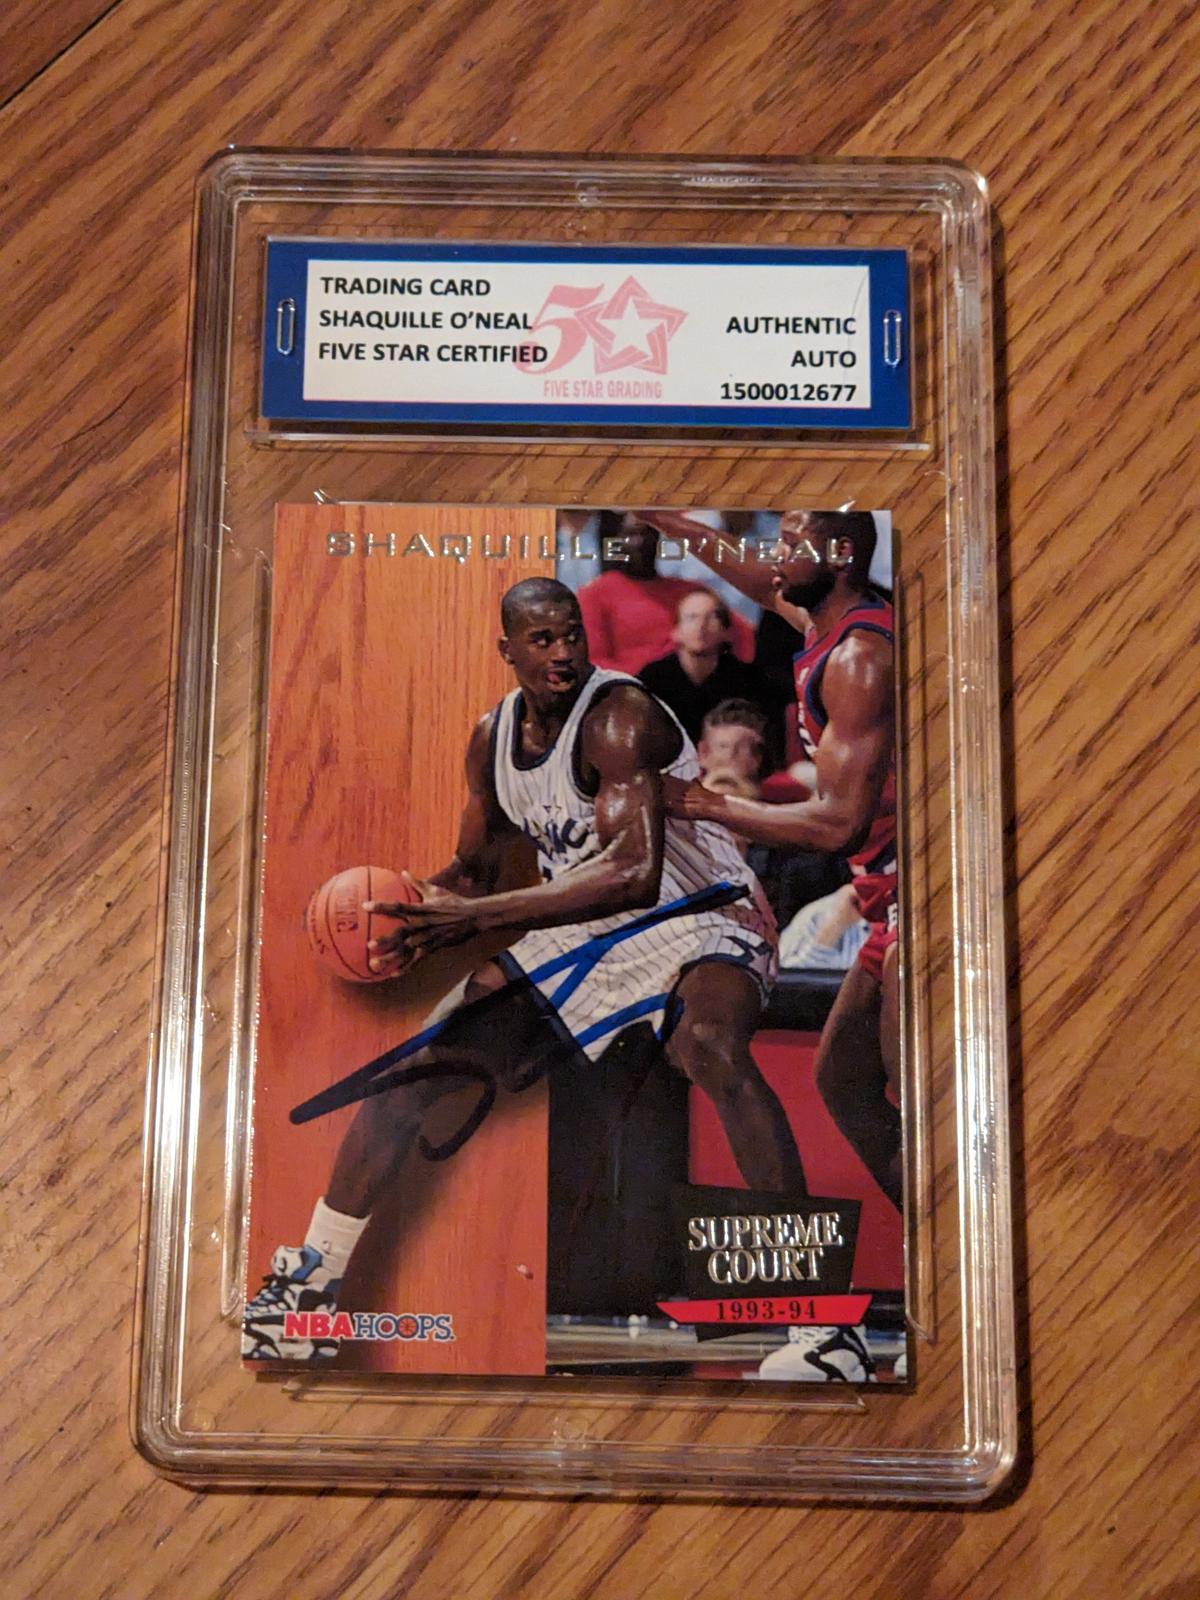 Shaquille O'neal 1994 hoops auto Authenticated by Fivestar Grading Graded